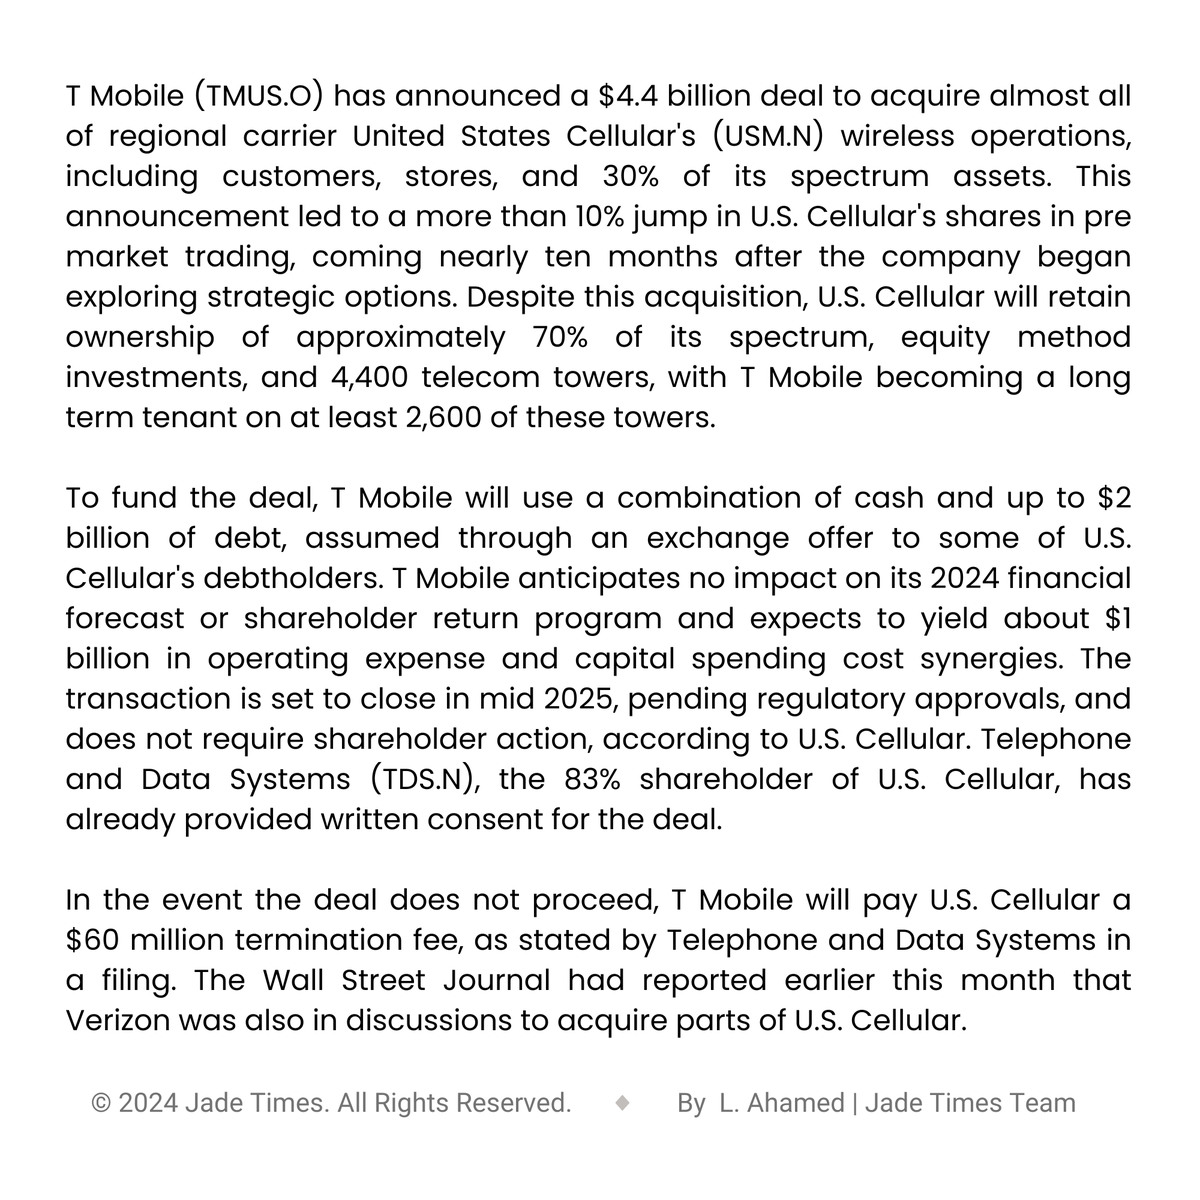 T Mobile to acquire nearly all of US Cellular's wireless operations in a $4.4 billion transaction
—— 
T Mobile will acquire most of U.S. Cellular's wireless operations for $4.4 billion.
——
Visit the link in our bio.
#jadetimes #TMobile #USCellular #TelecomDeal